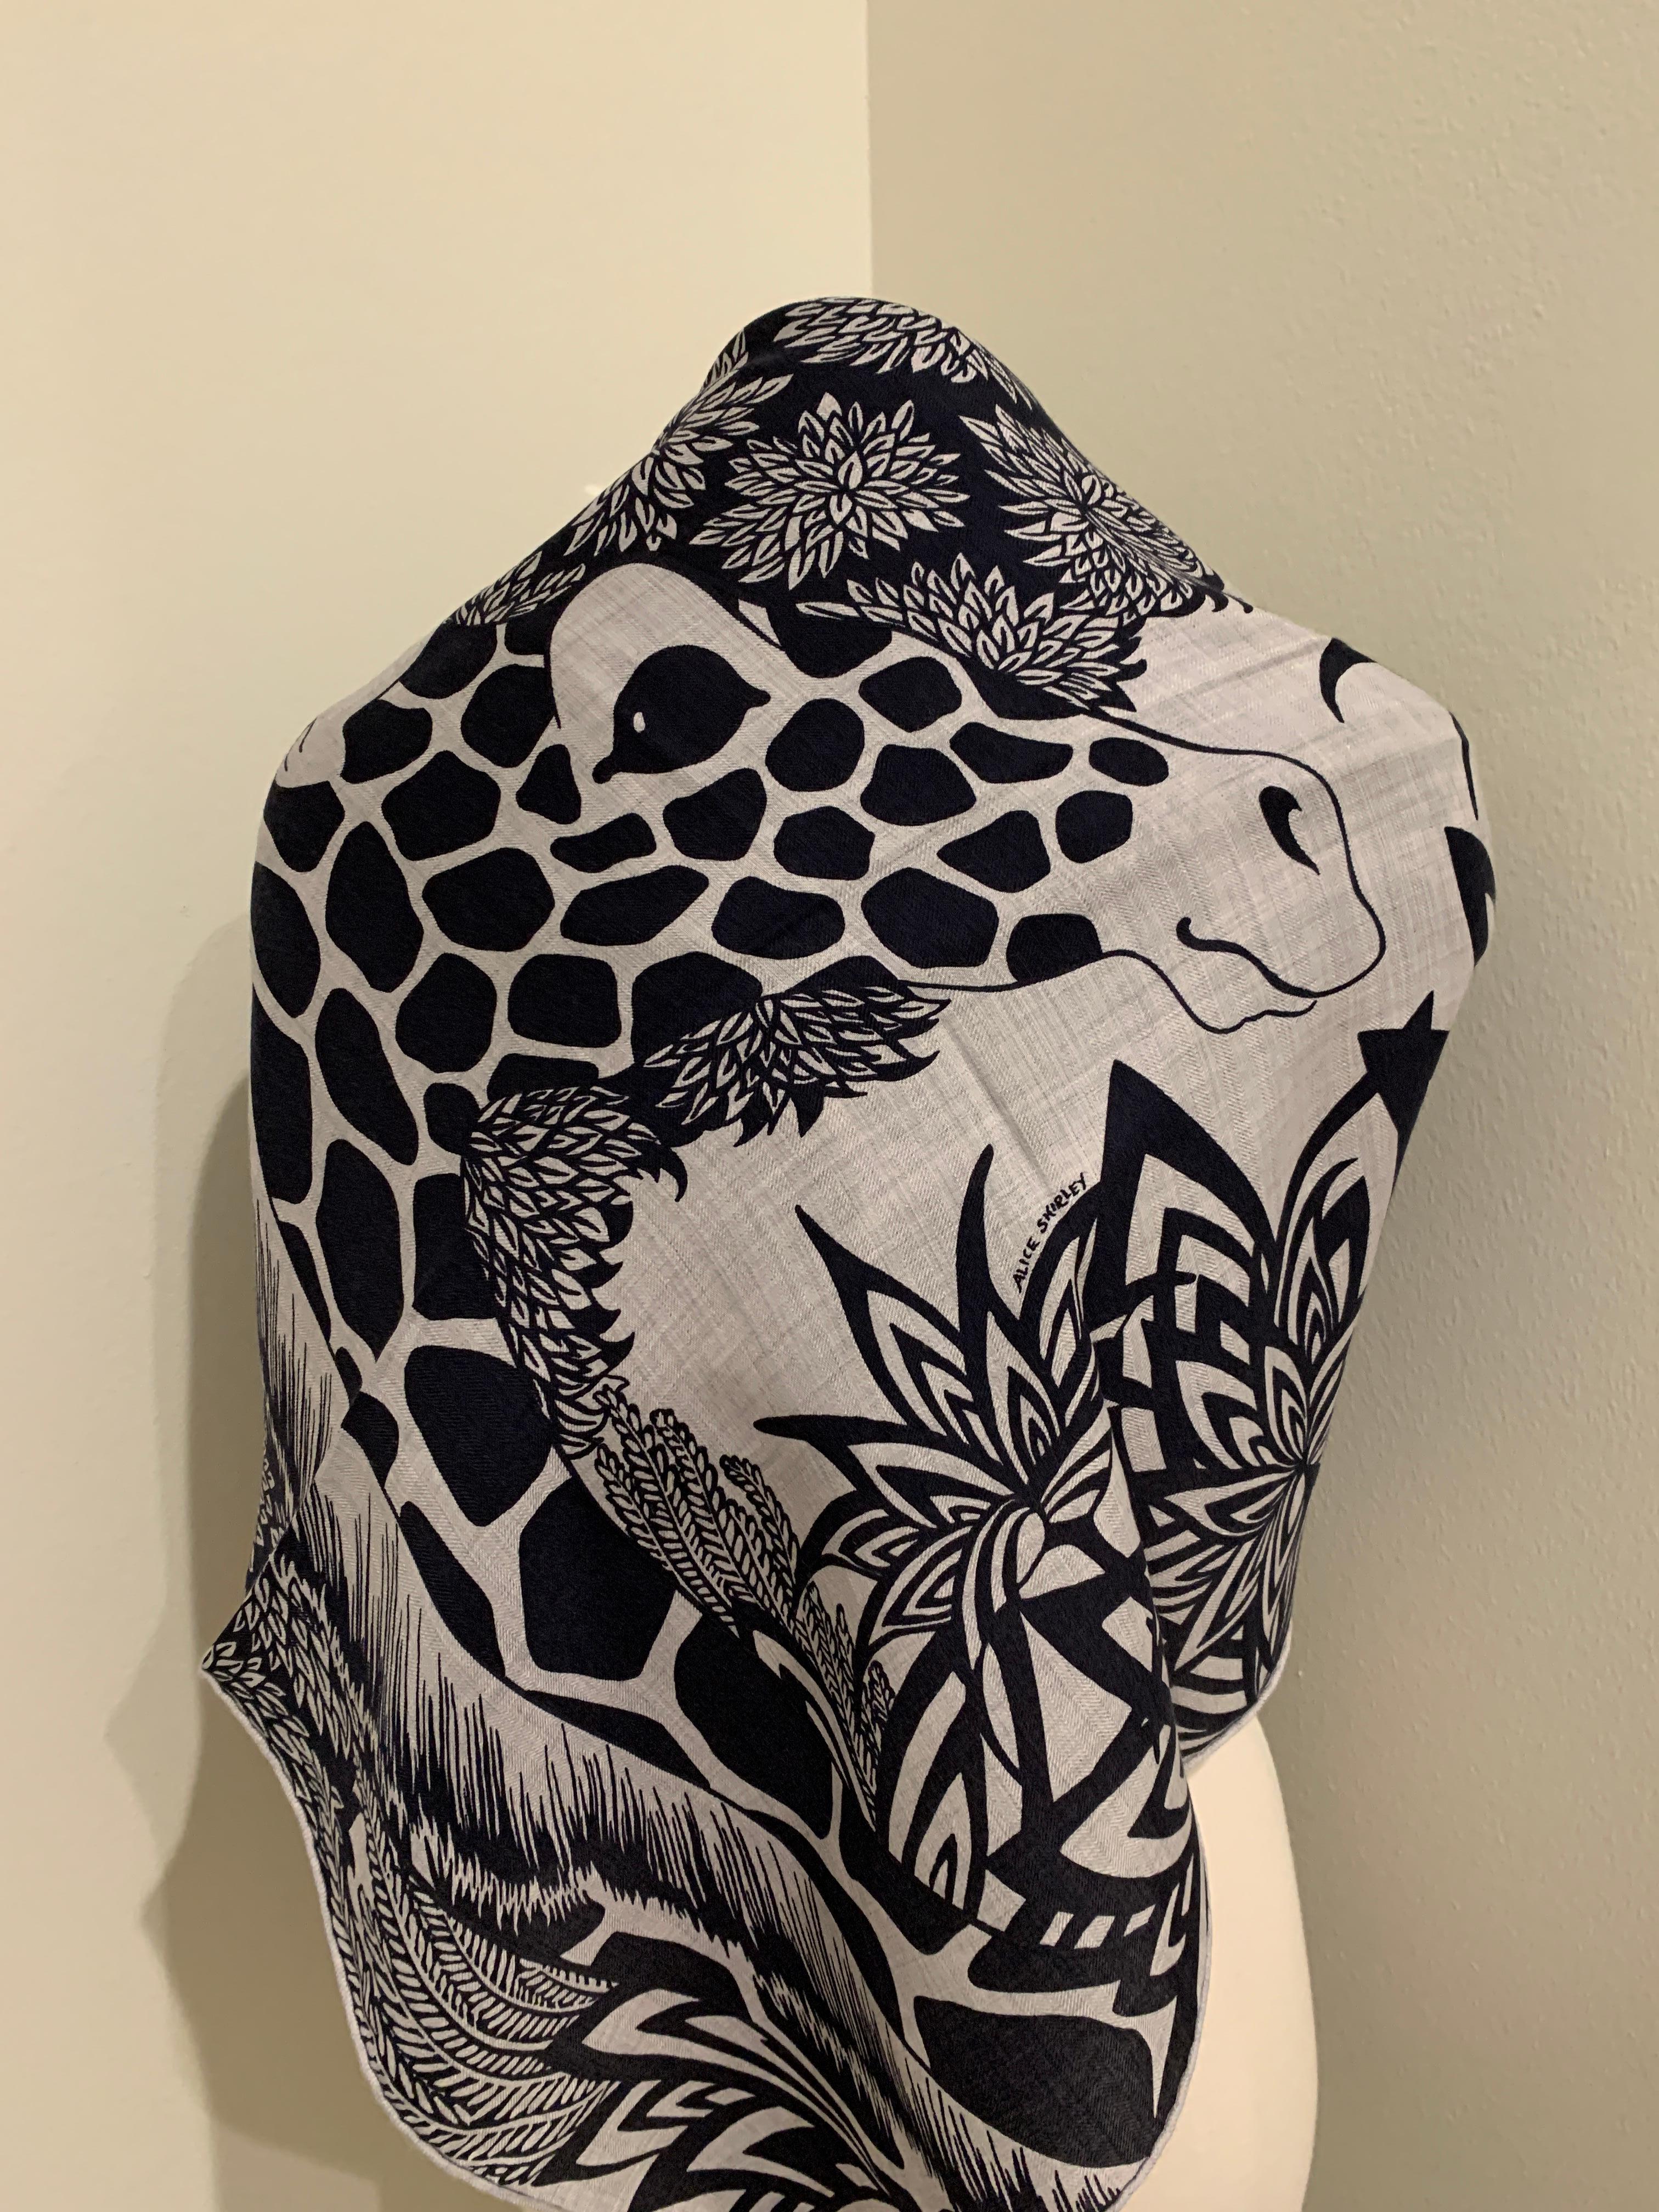 Hermes Cashmere Shawl/Scarf
The Three Graces 
Giraffes
Designed by Alice Shirley


Cashmere shawl large 140cmShawl in cashmere and silk with hand-rolled edges (70% cashmere, 30 % silk).

Printed on our iconic cashmere and silk material, this giant